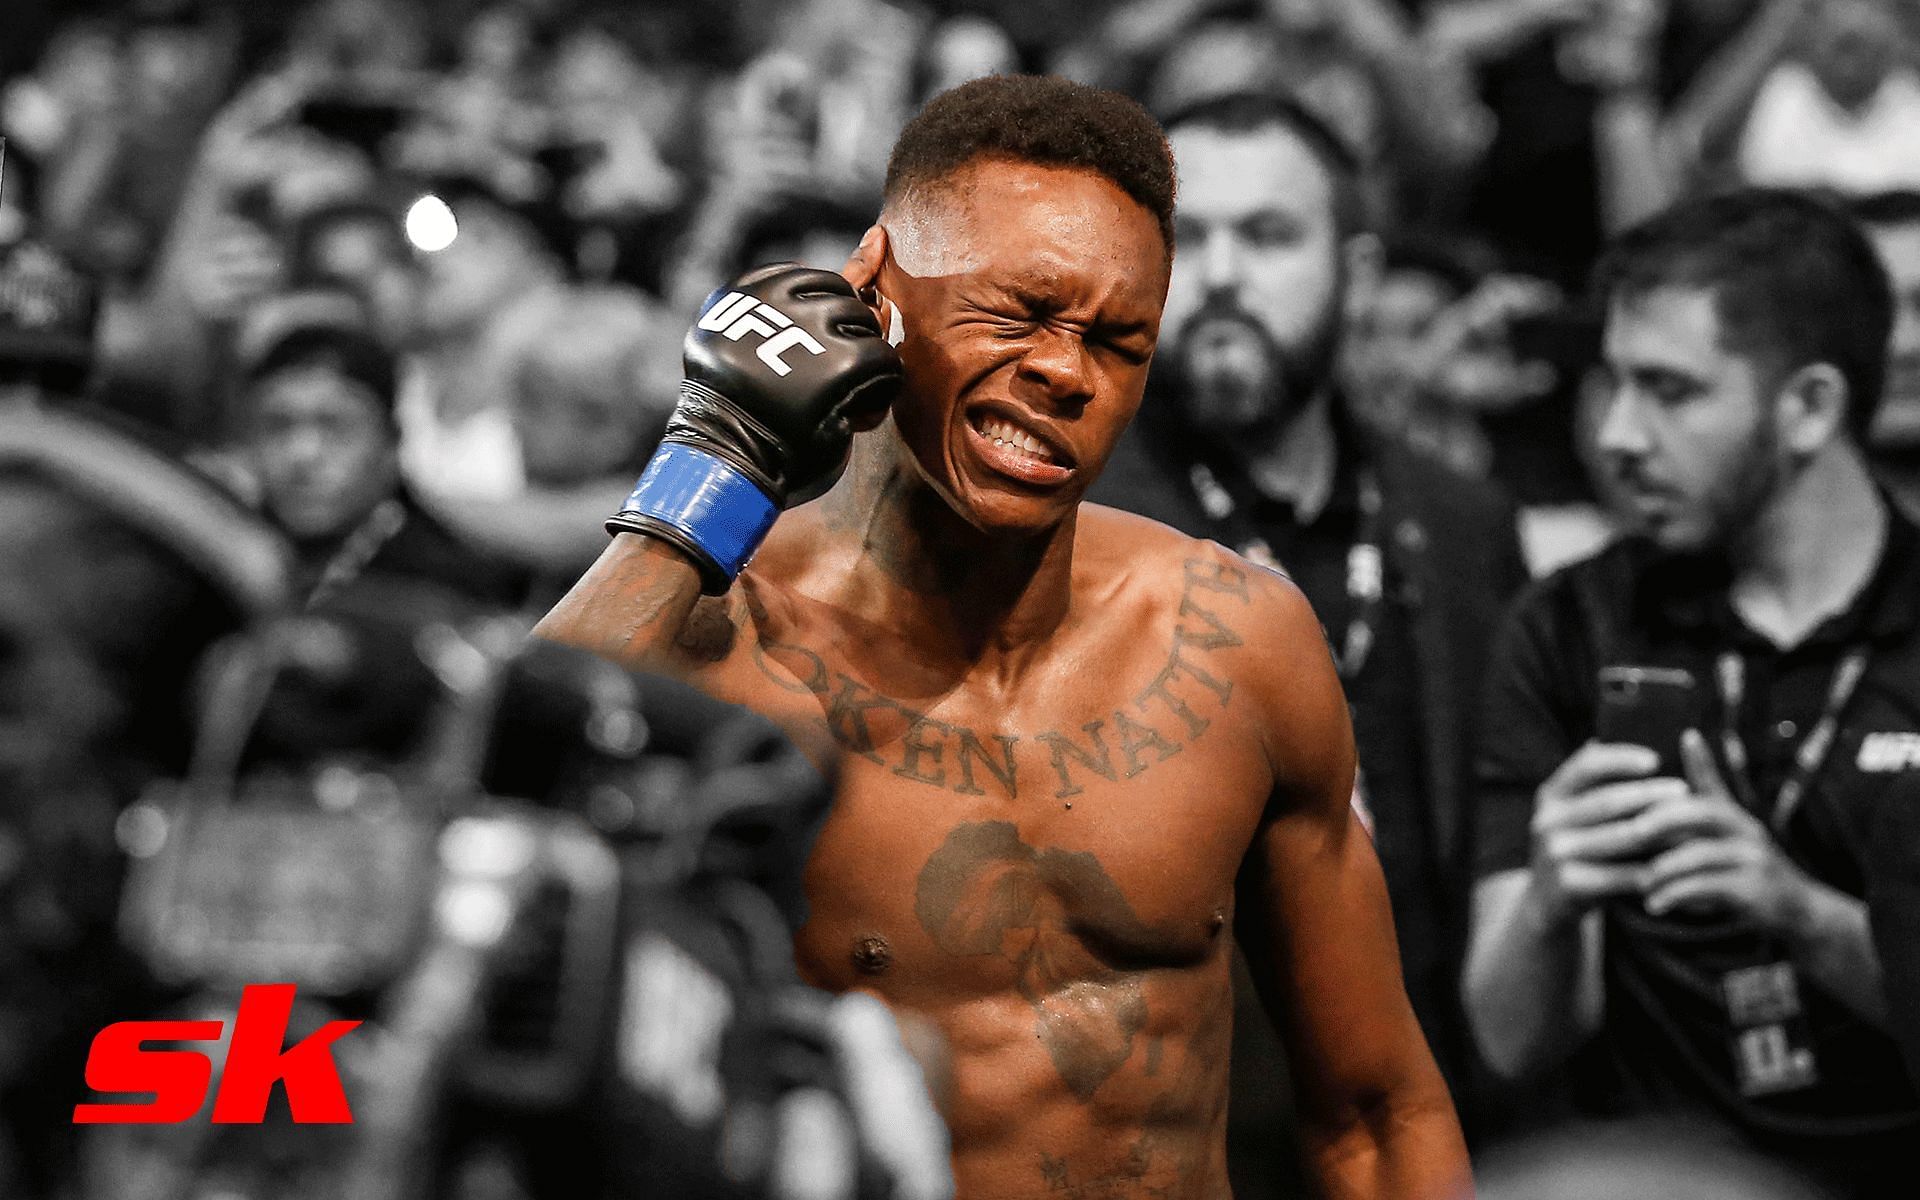 Fans take offence at Israel Adesanya ahead of UFC 287